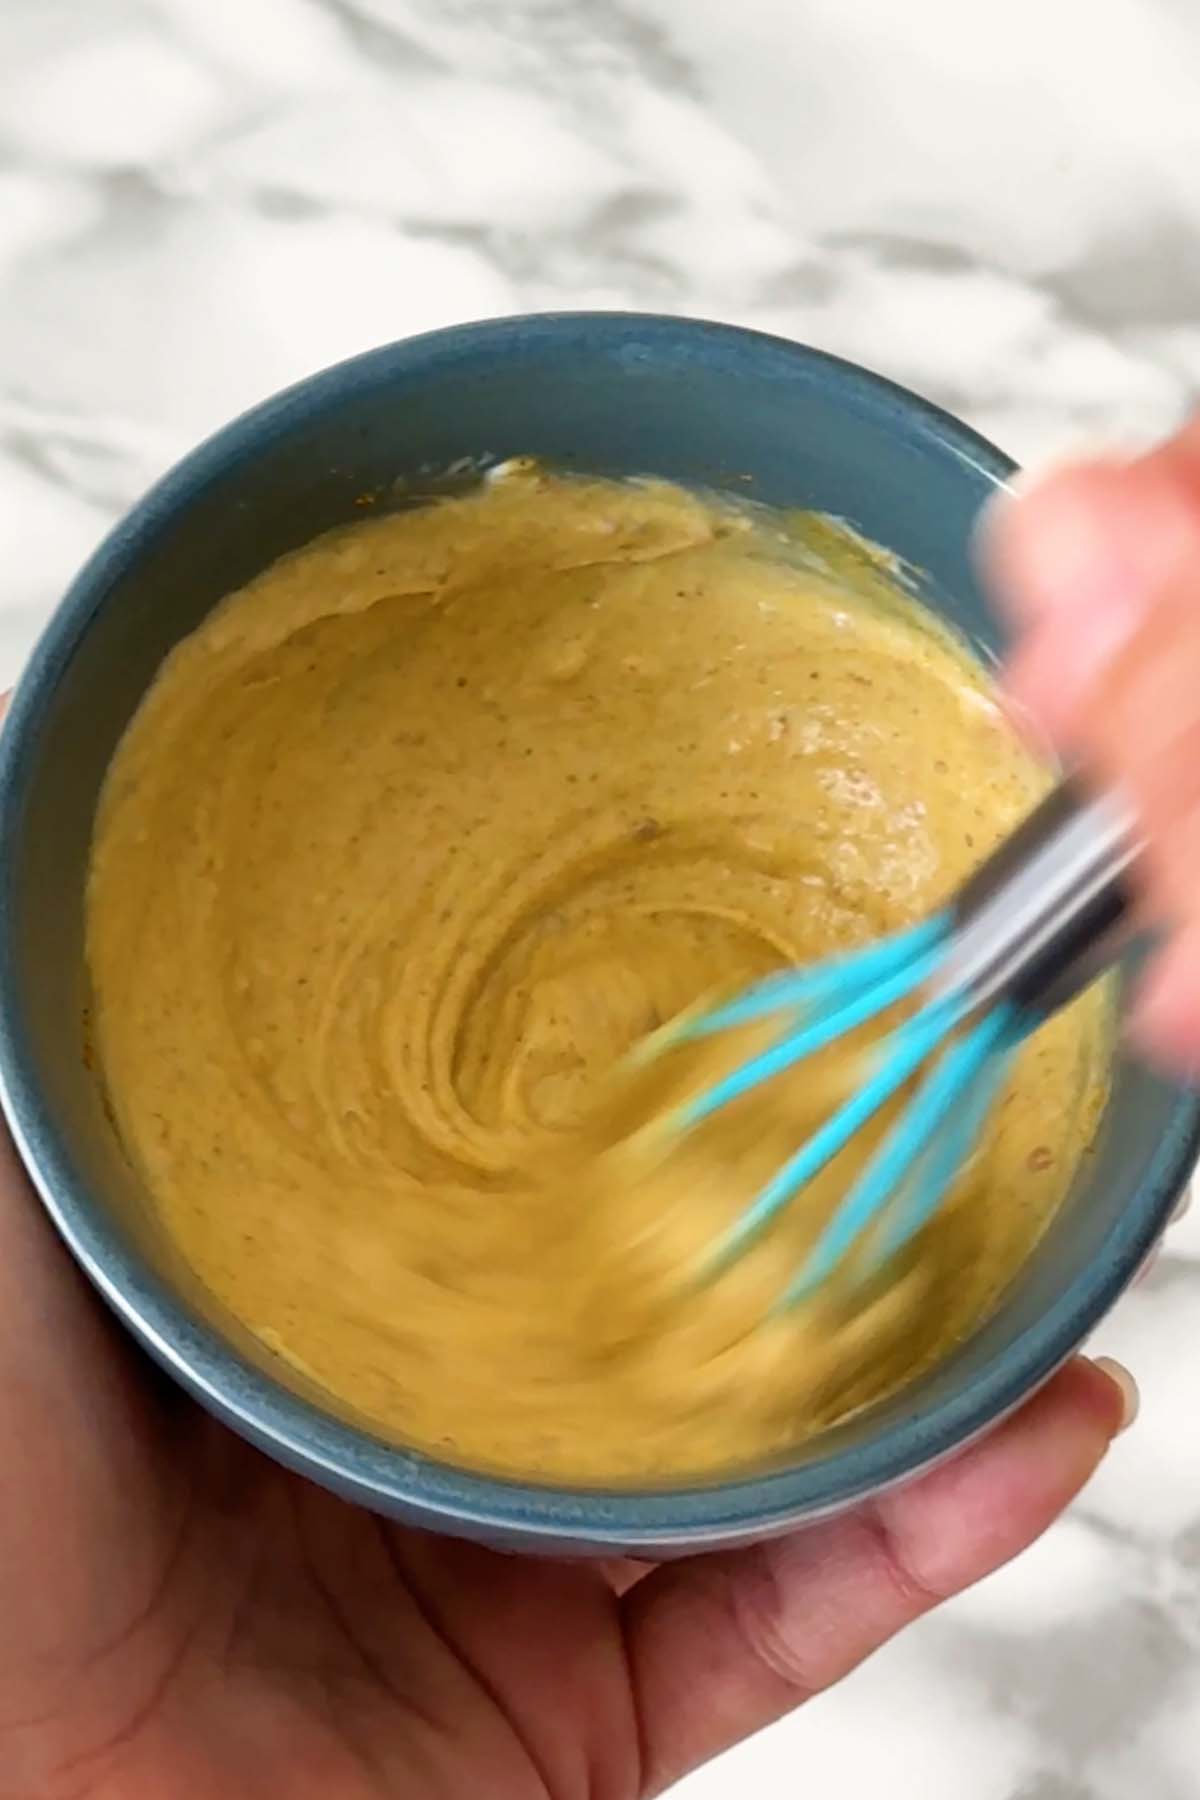 Yellow sauce is whisked in a blue bowl.